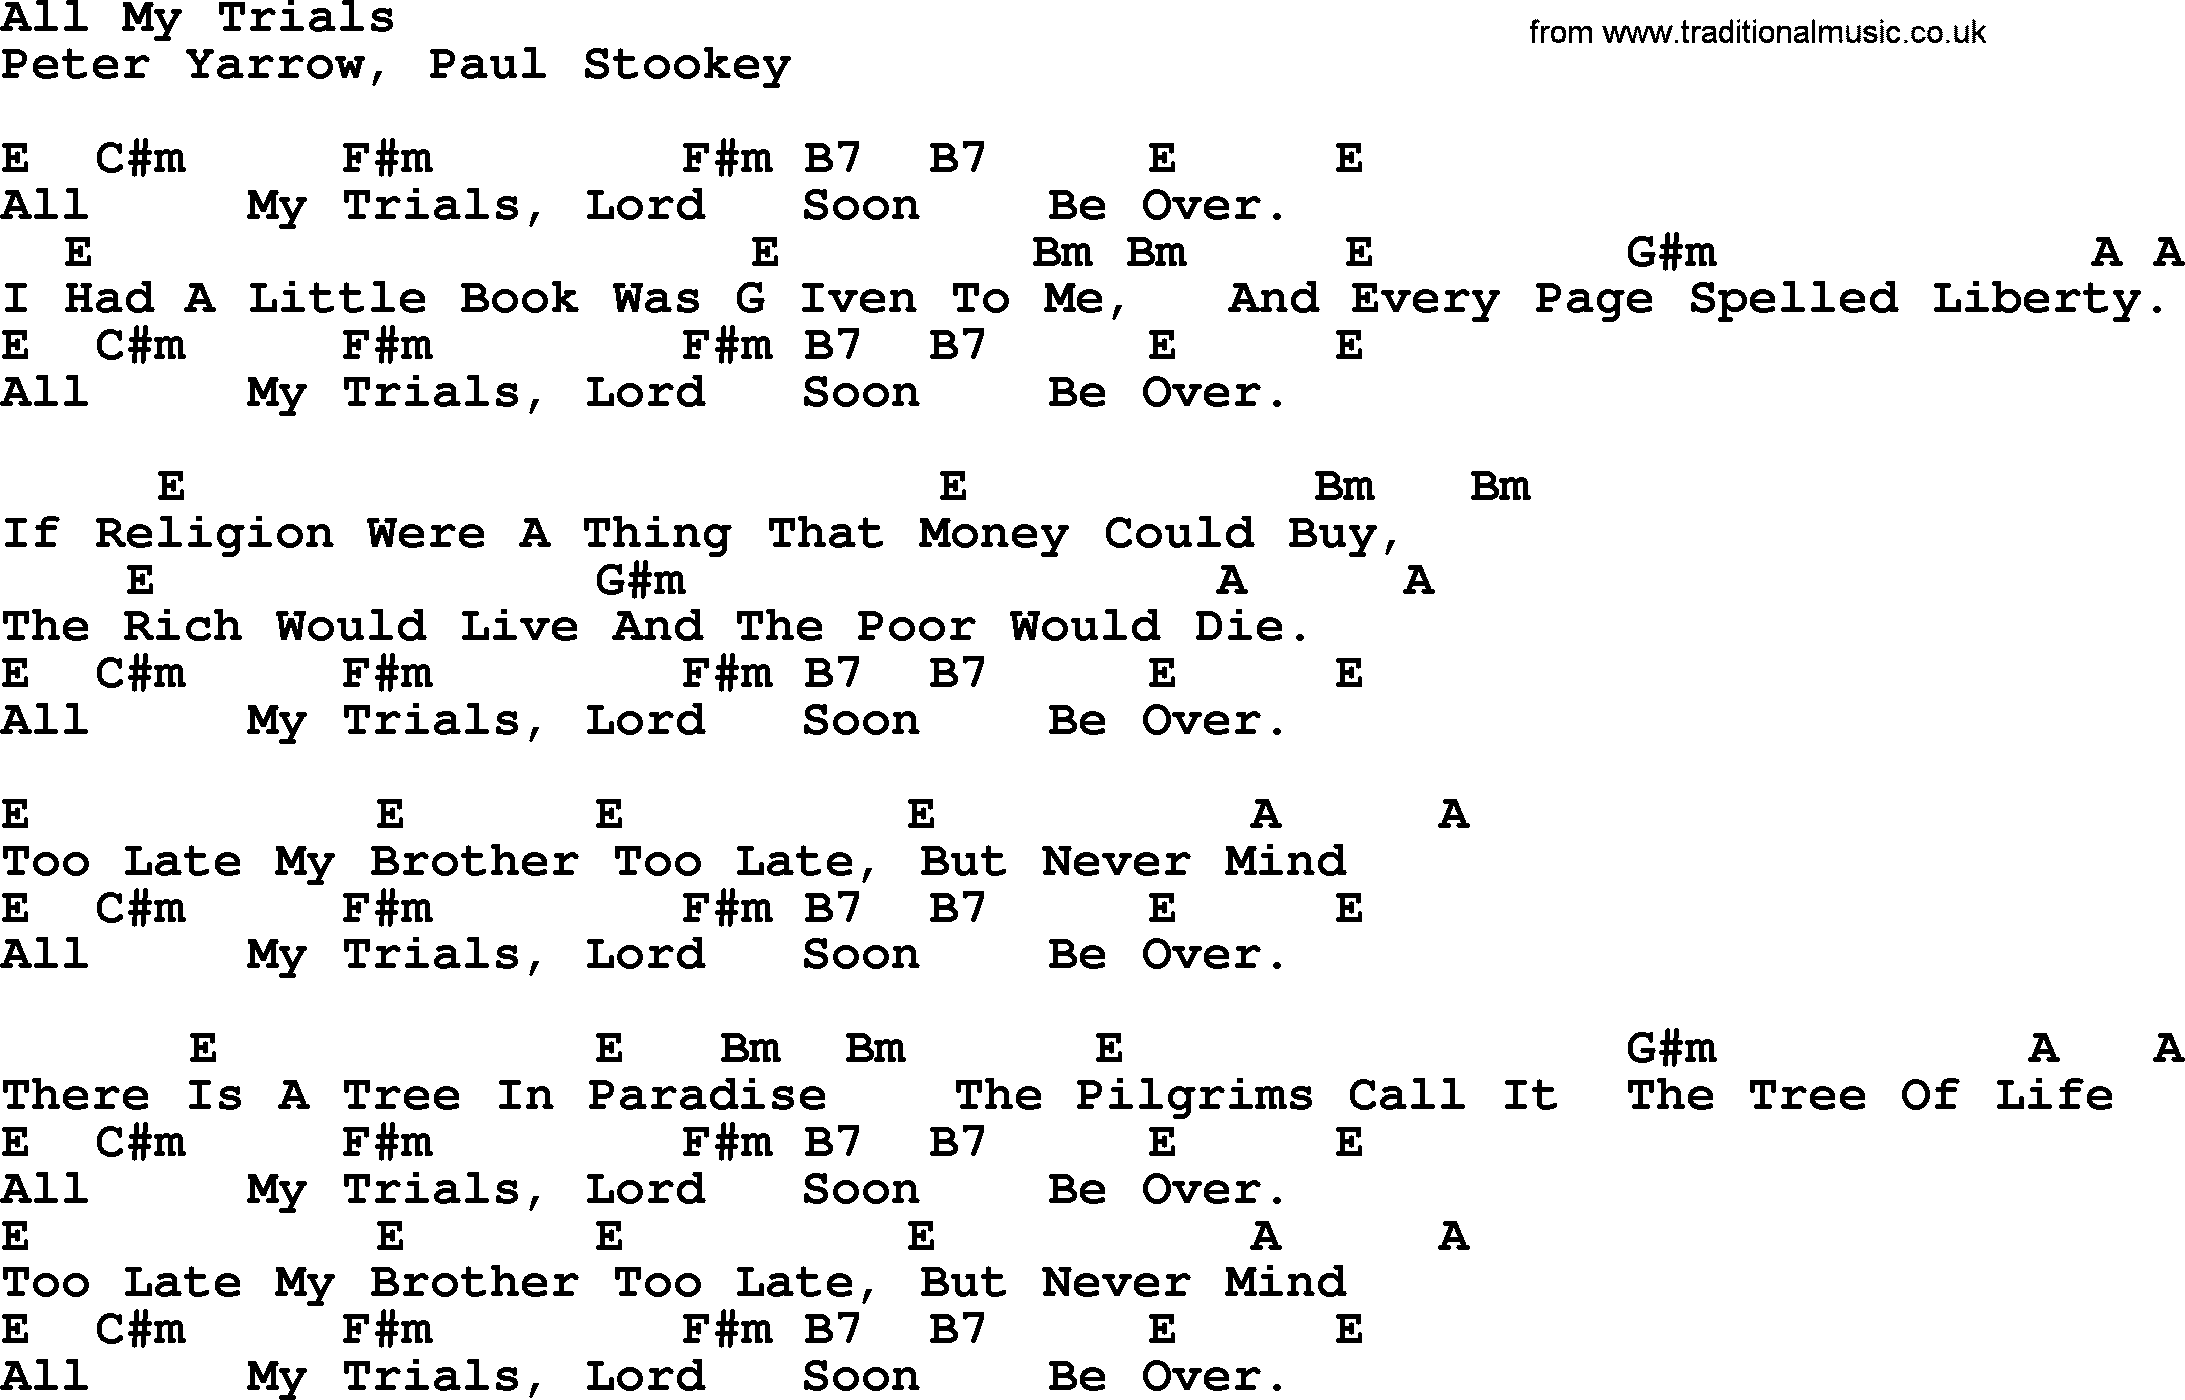 Peter, Paul and Mary song All My Trials, lyrics and chords